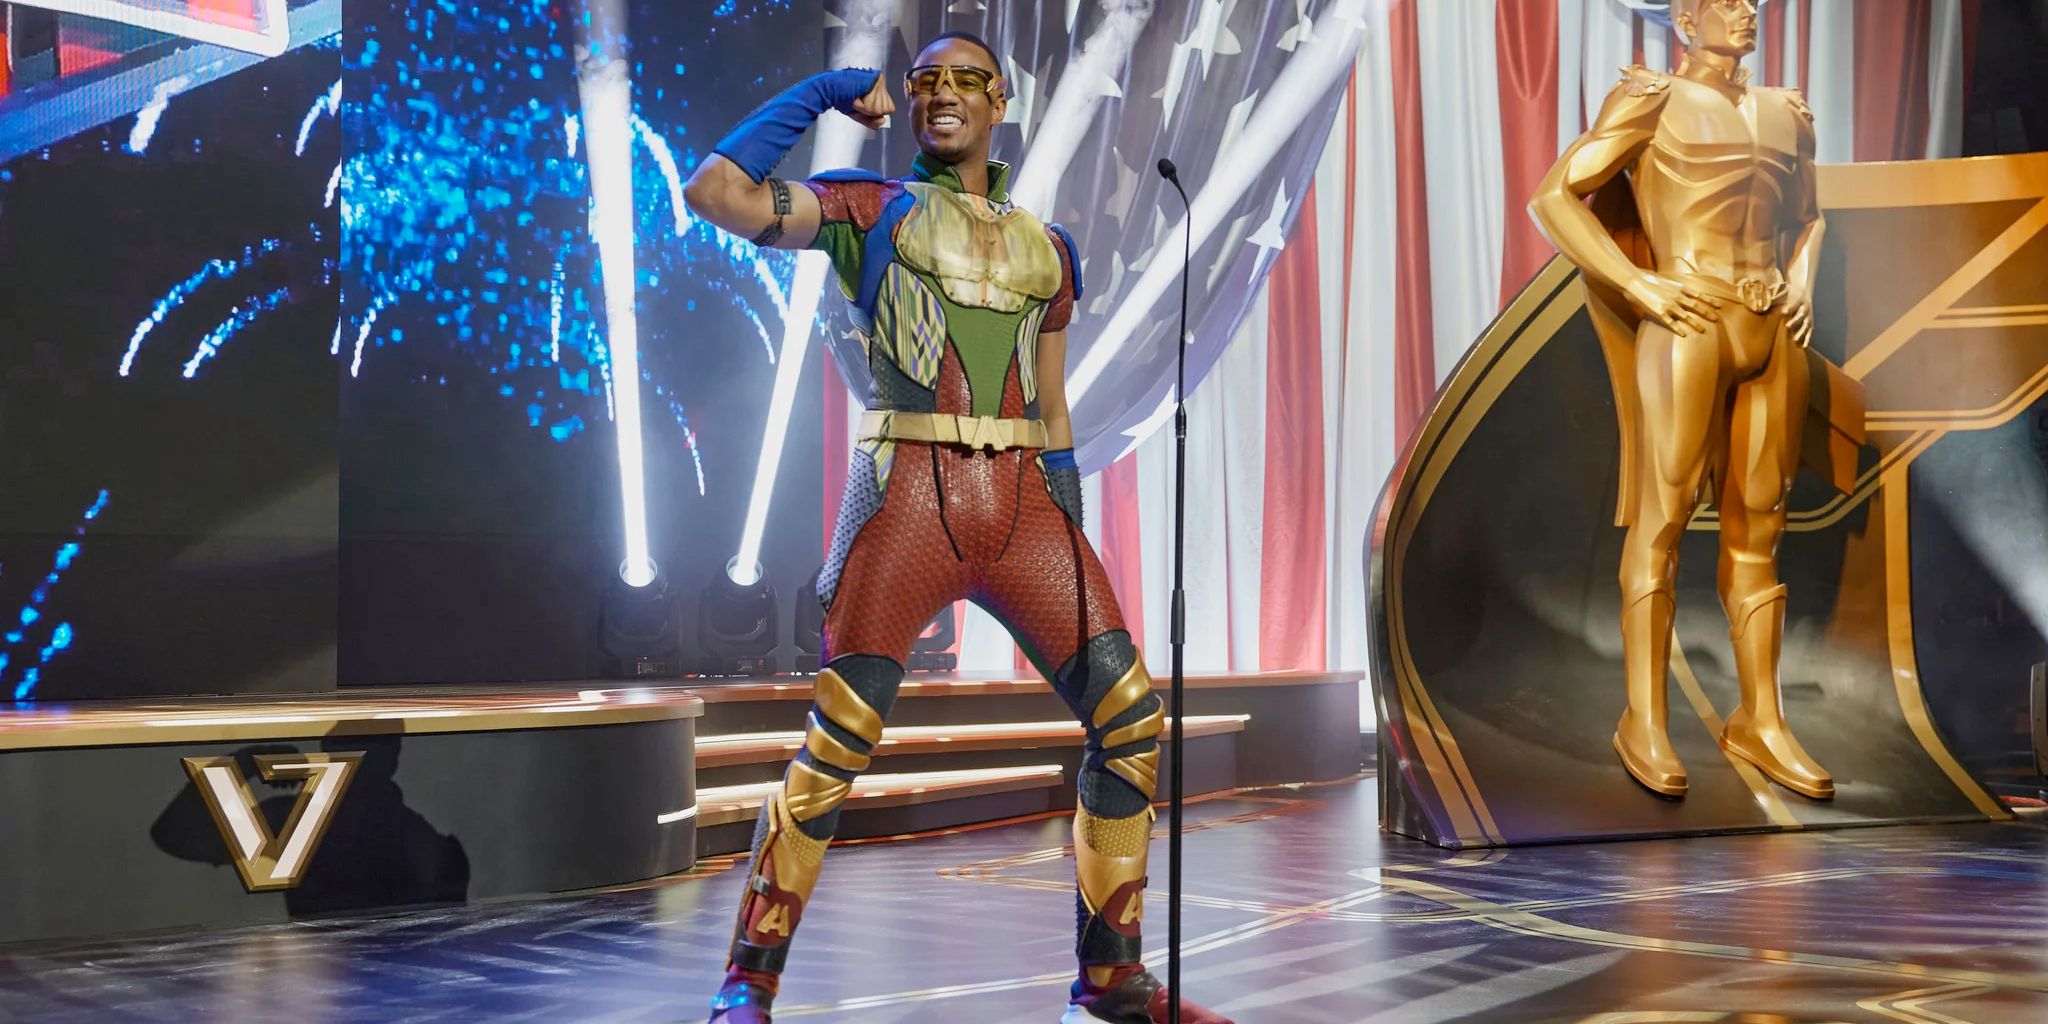 A-Train performing on stage in The Boys Season 3, Episode 2, "The Only Man in the Sky."